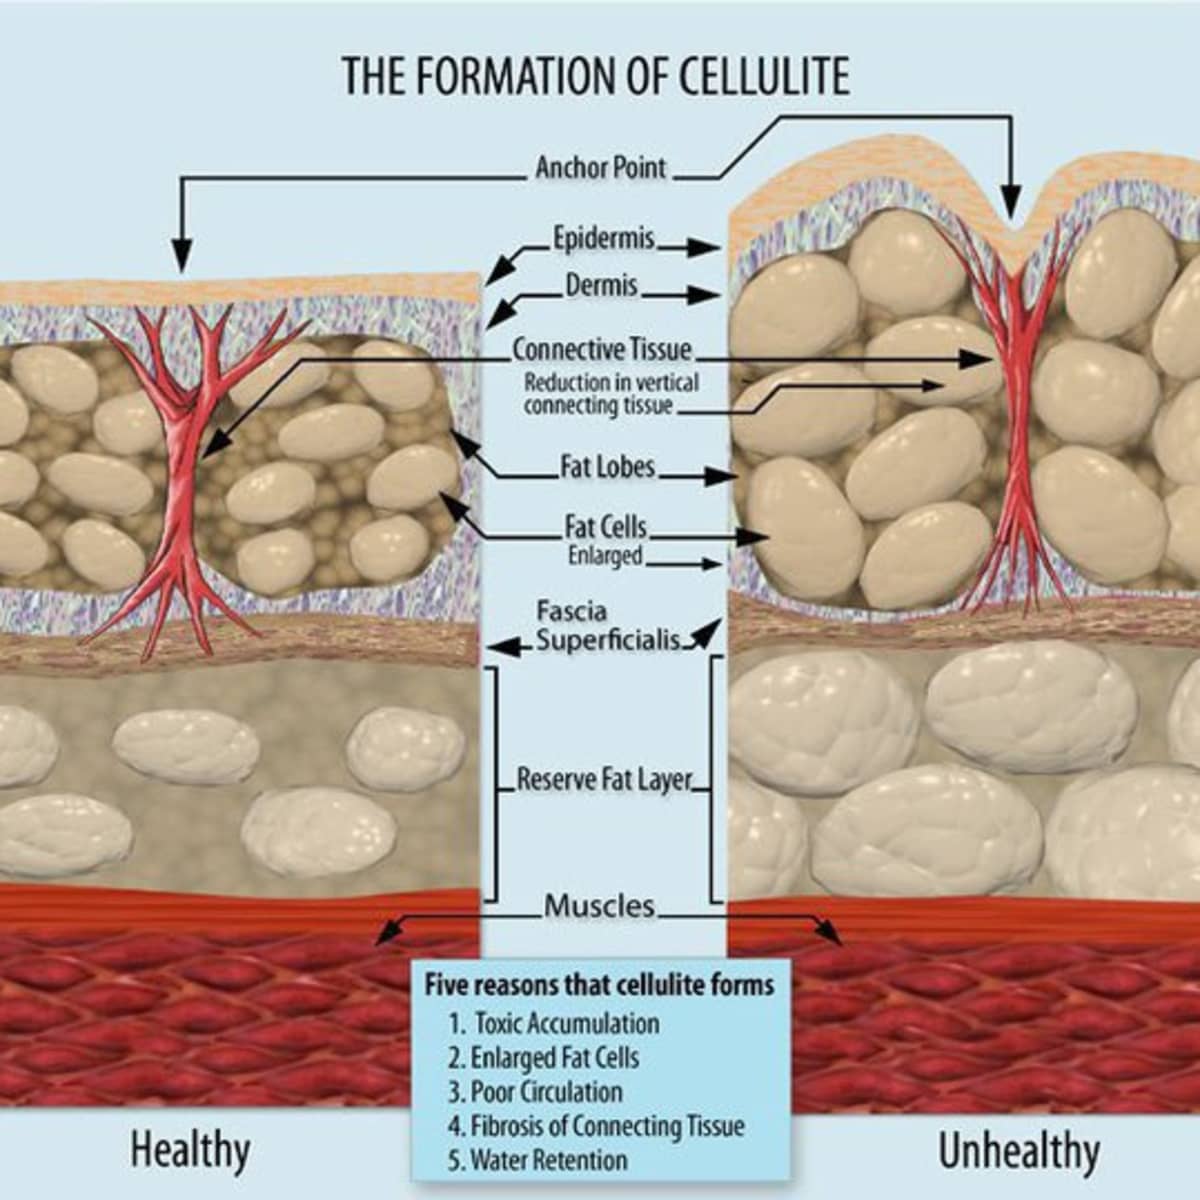 9 Ways to Help Reduce Cellulite - HubPages